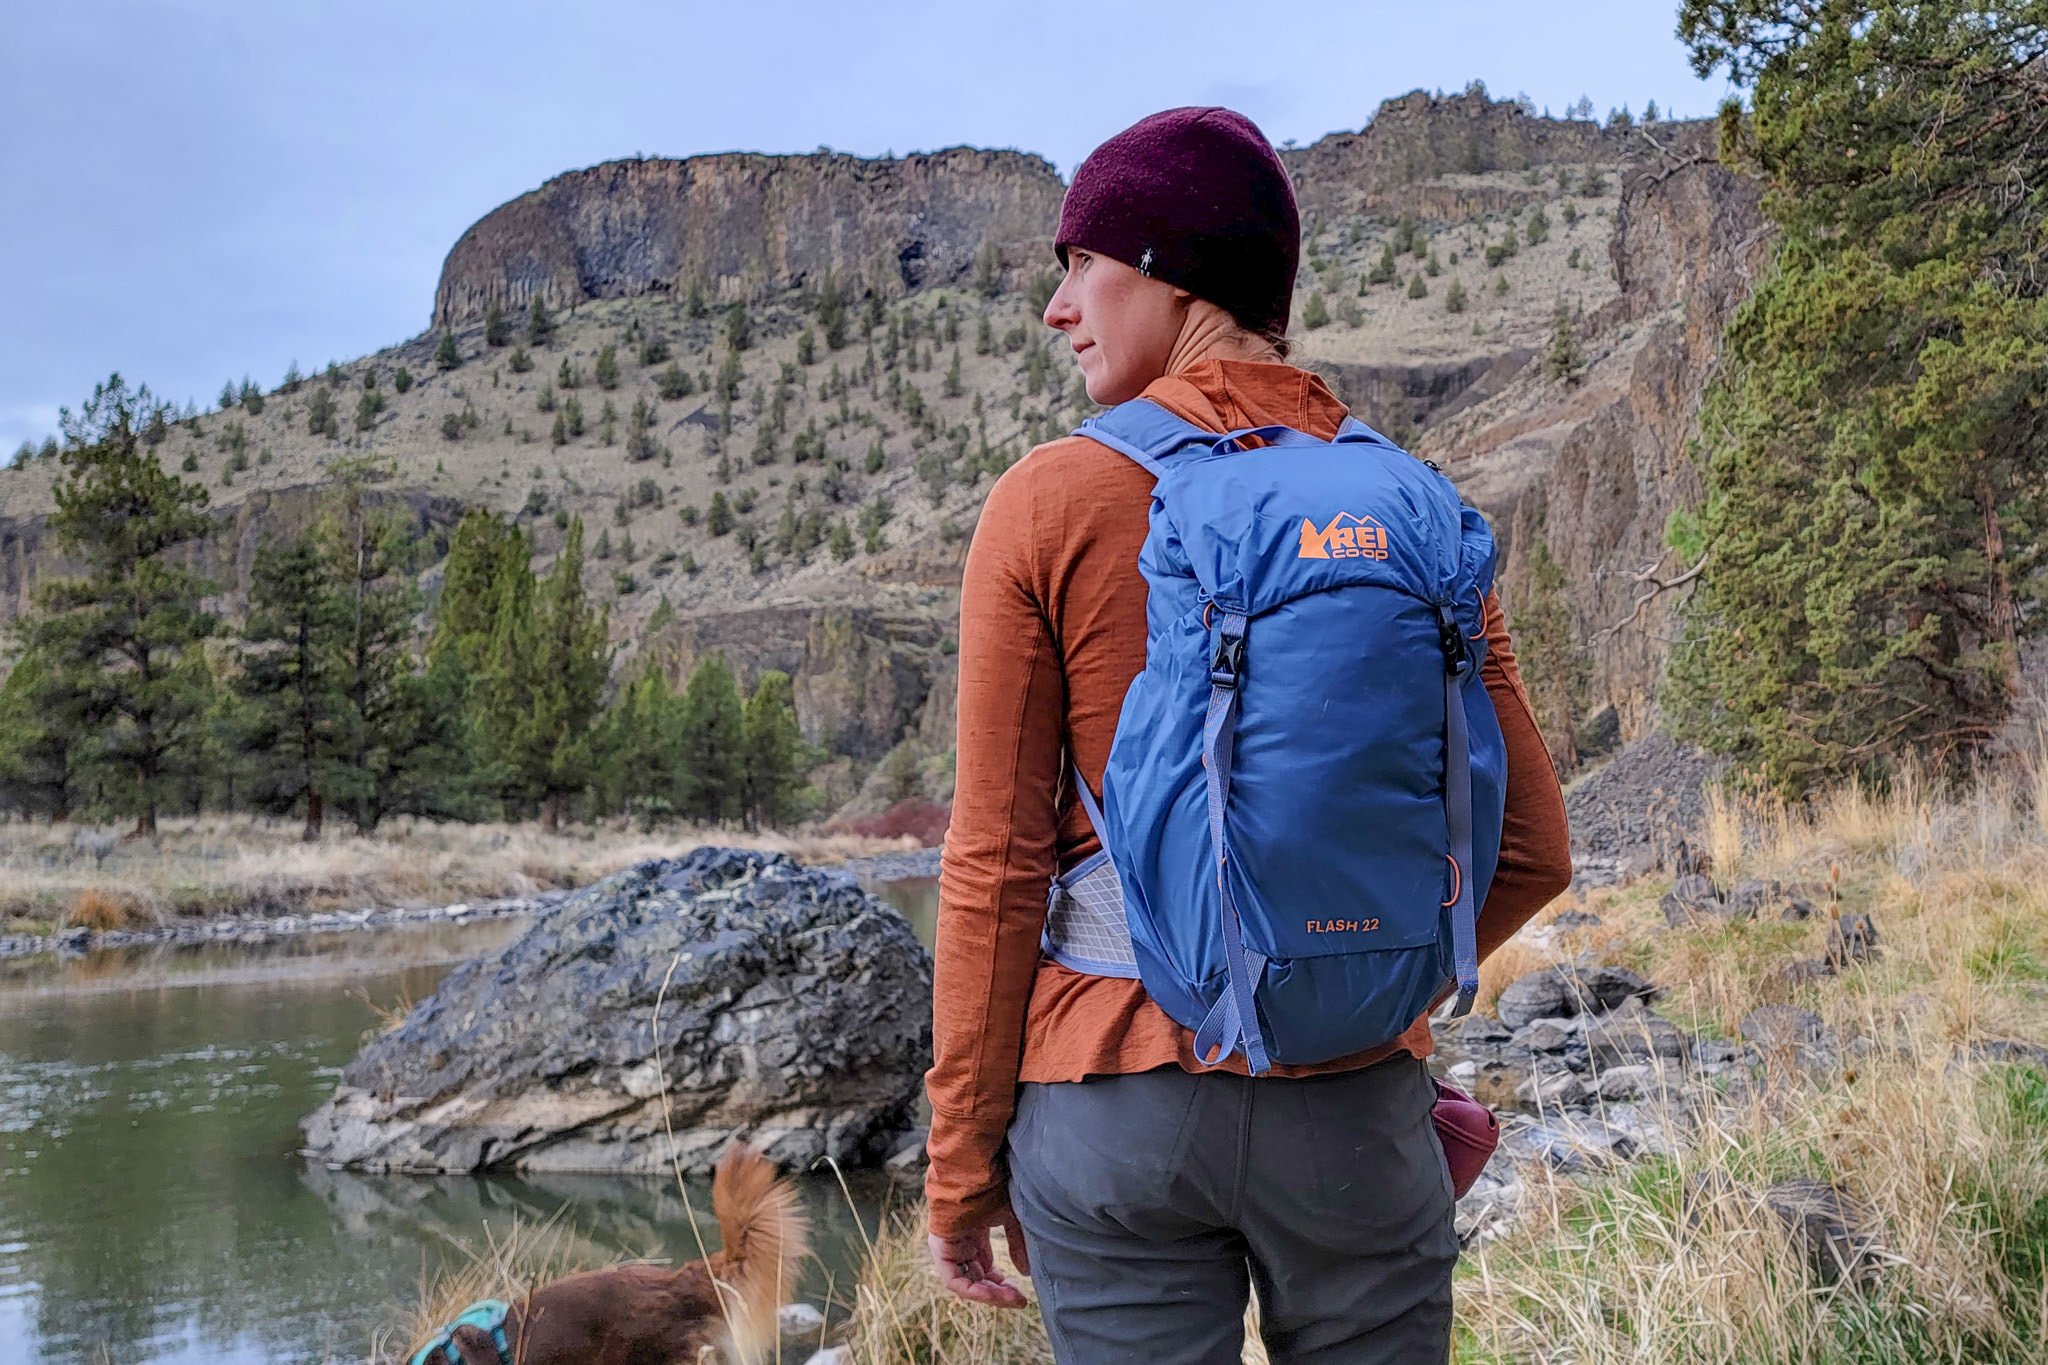 A hiker wearing the REI Flash 22 daypack next to a river with some high desert cliffs in teh background